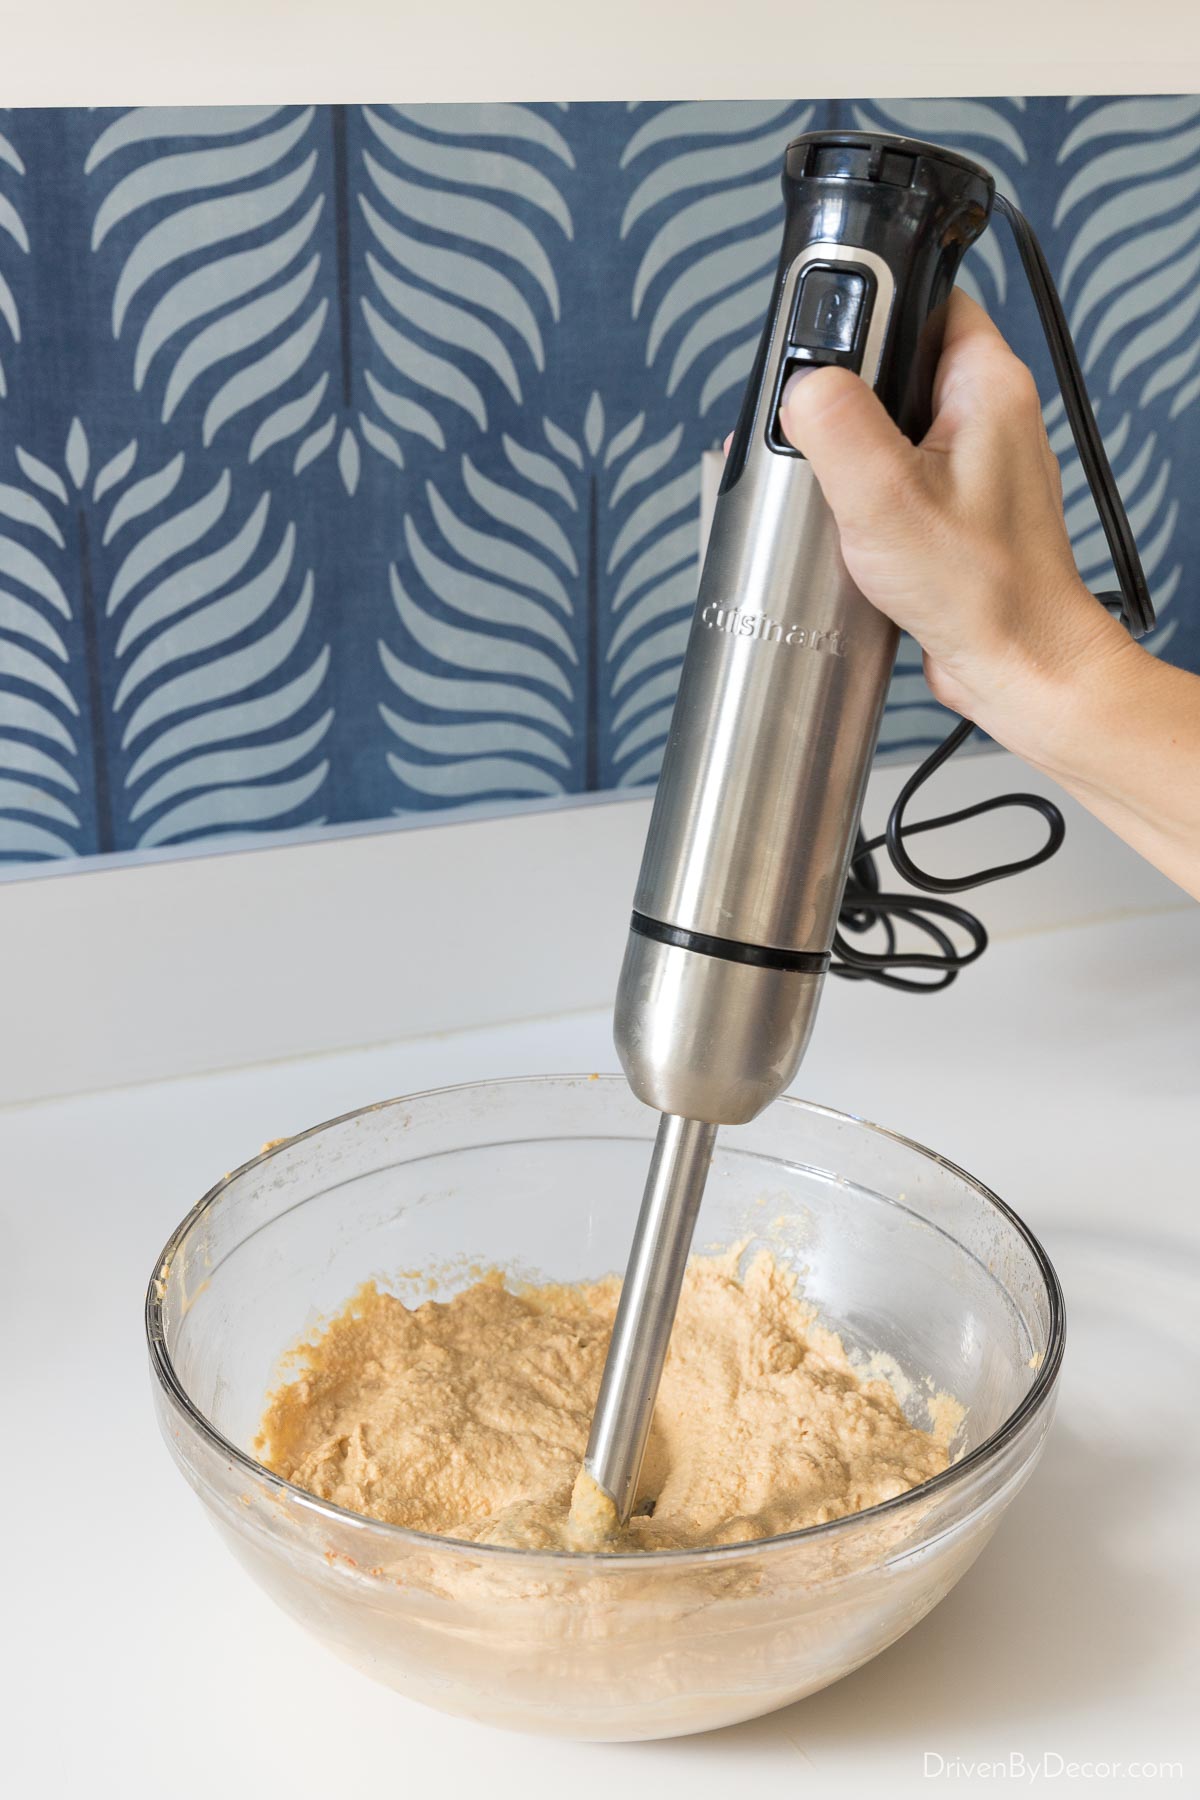 This immersion hand blender is one of my favorite small kitchen appliances